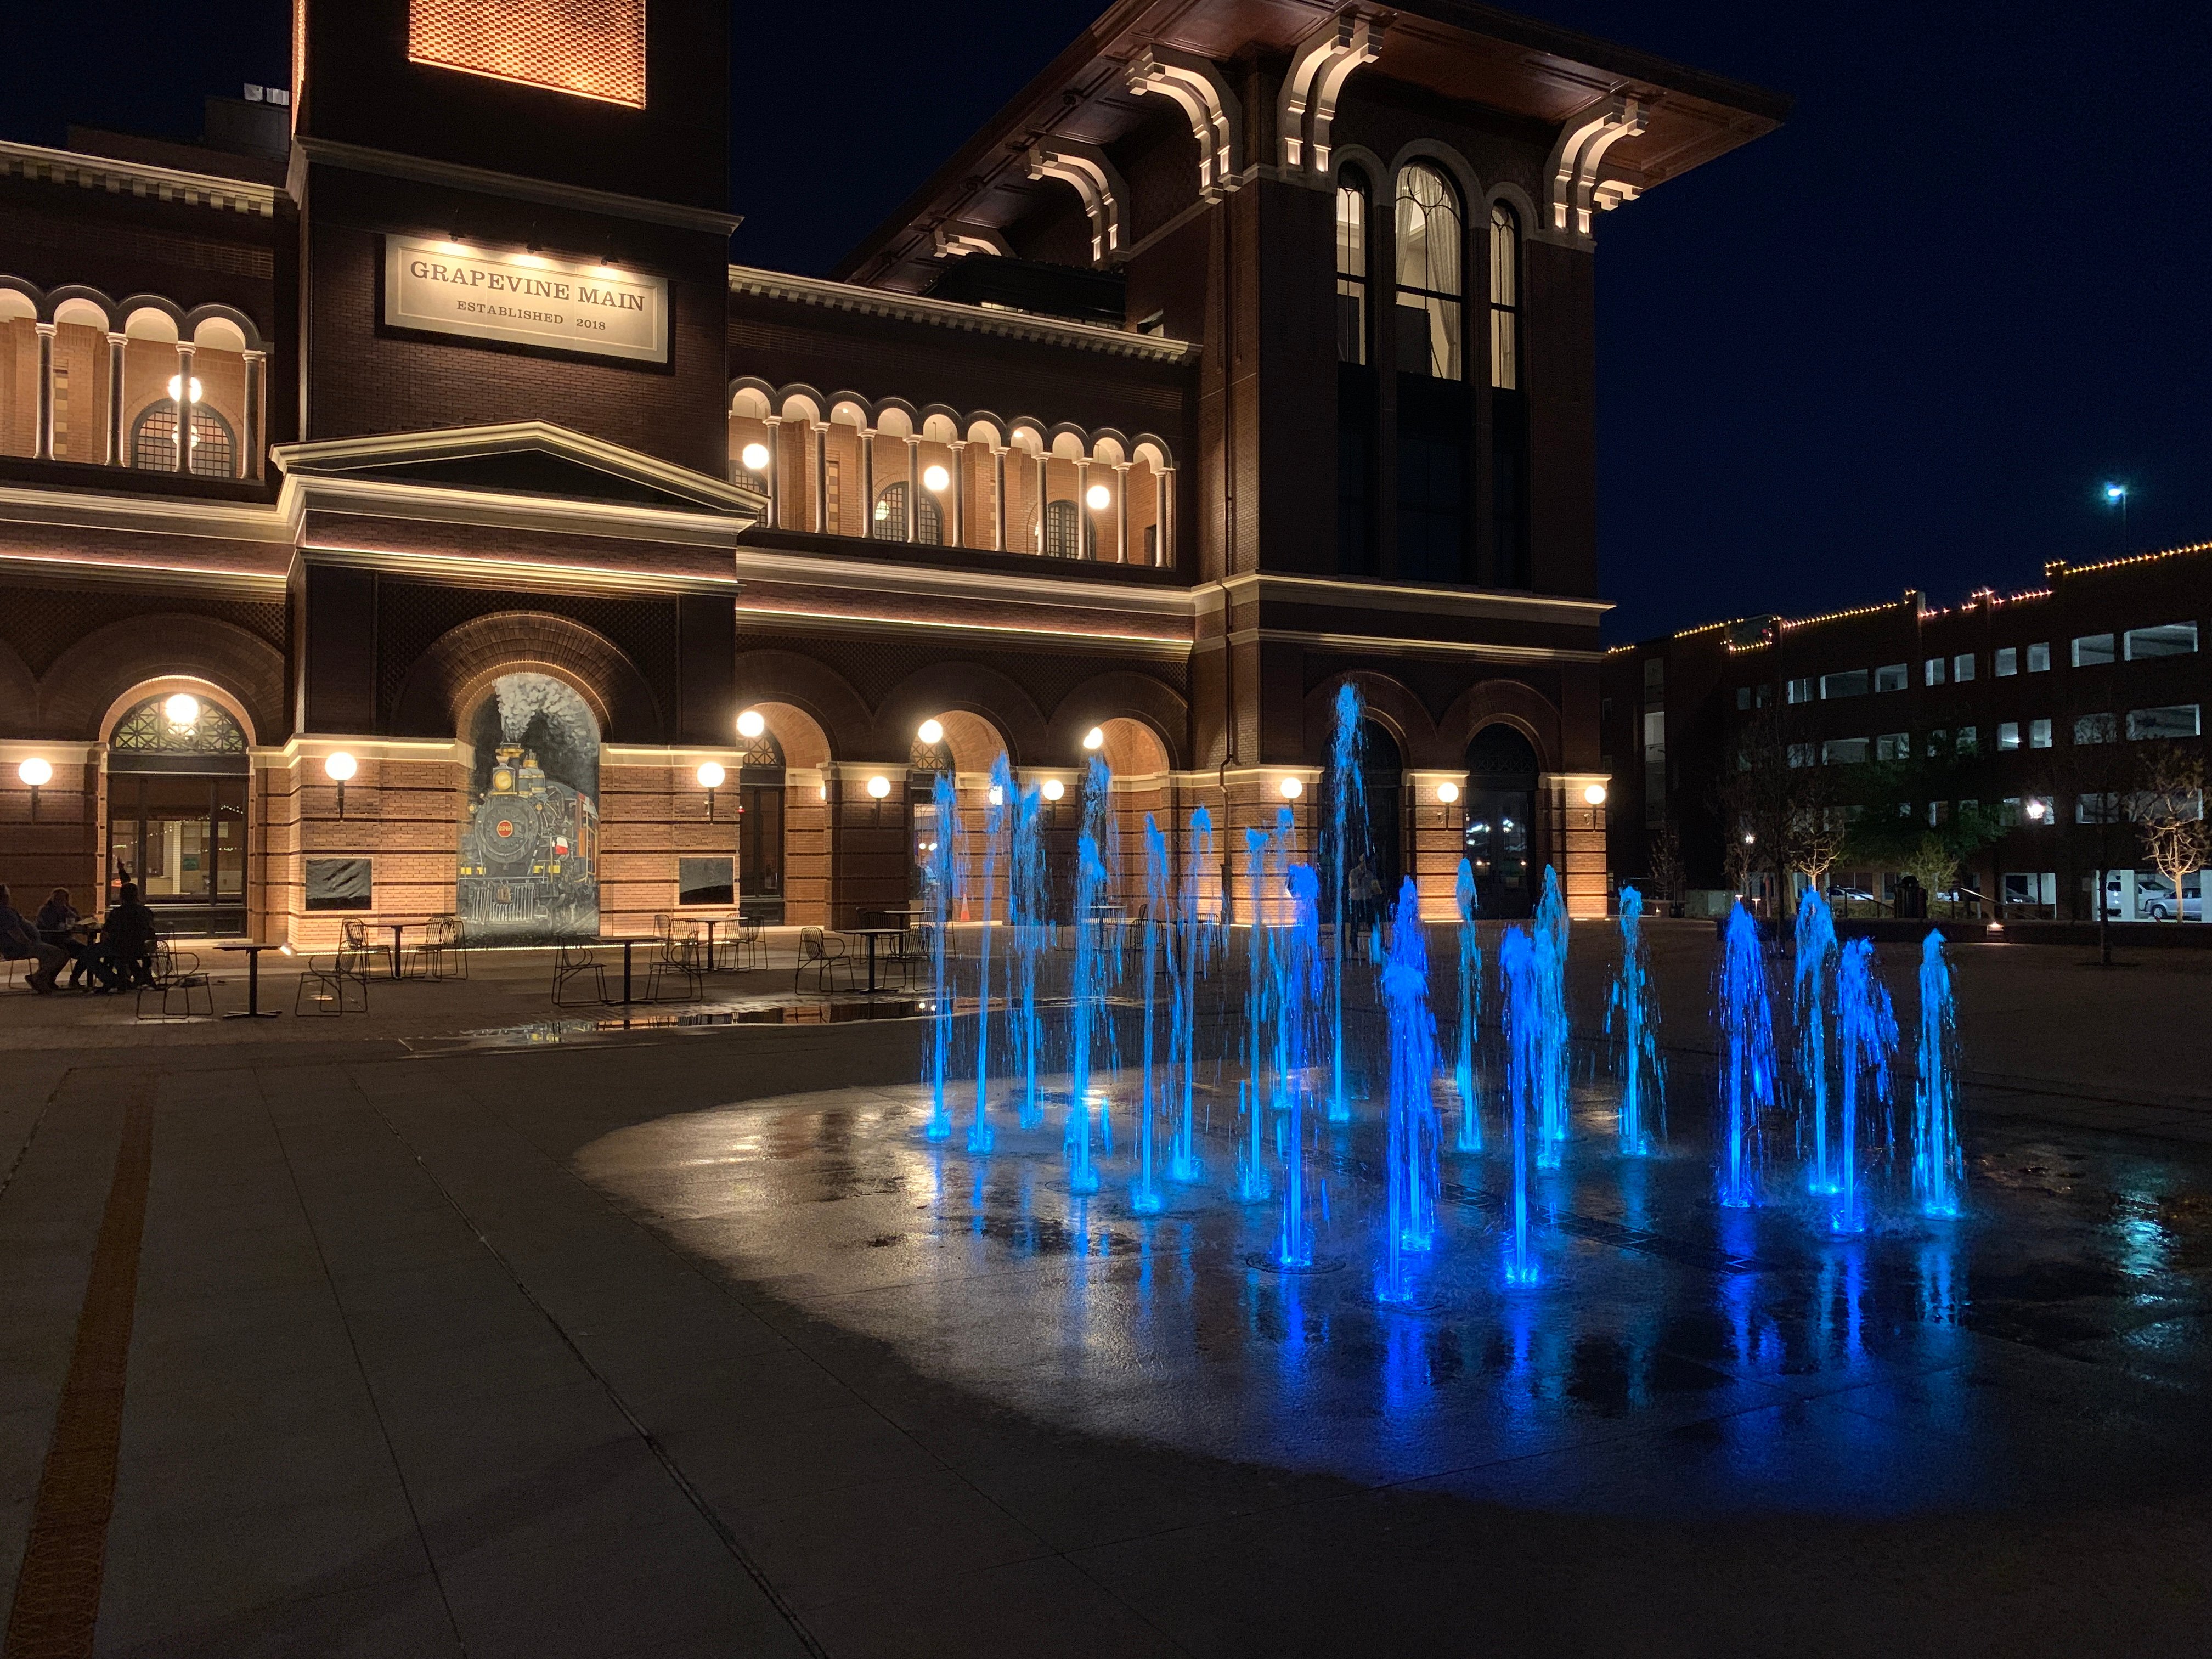 Grapevine Station Interactive Fountain at night